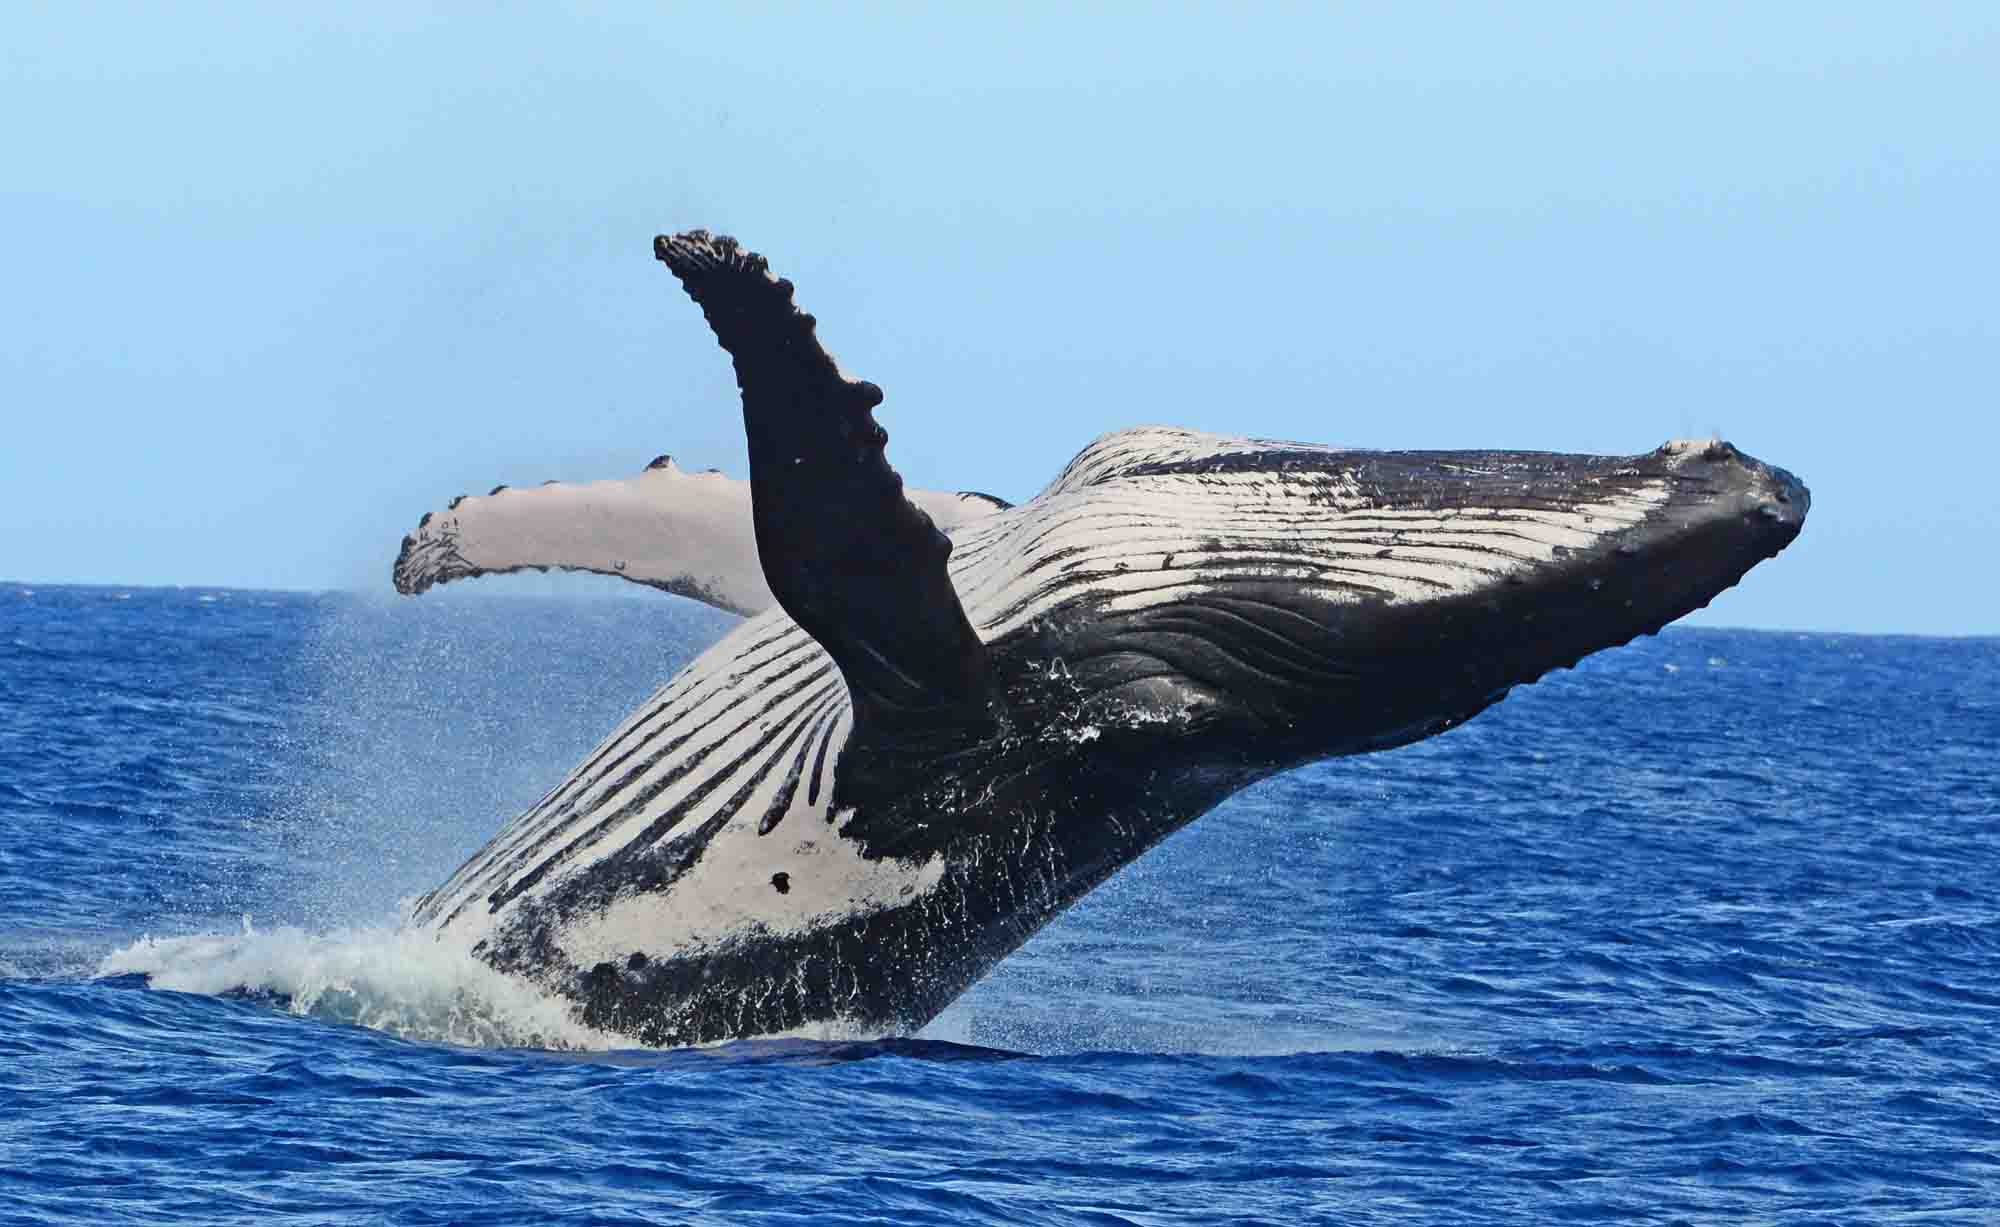 Whale Swim Whale watching Humpback Best private Boat Snorkeling Tour Moorea french Polynesia Tahiti